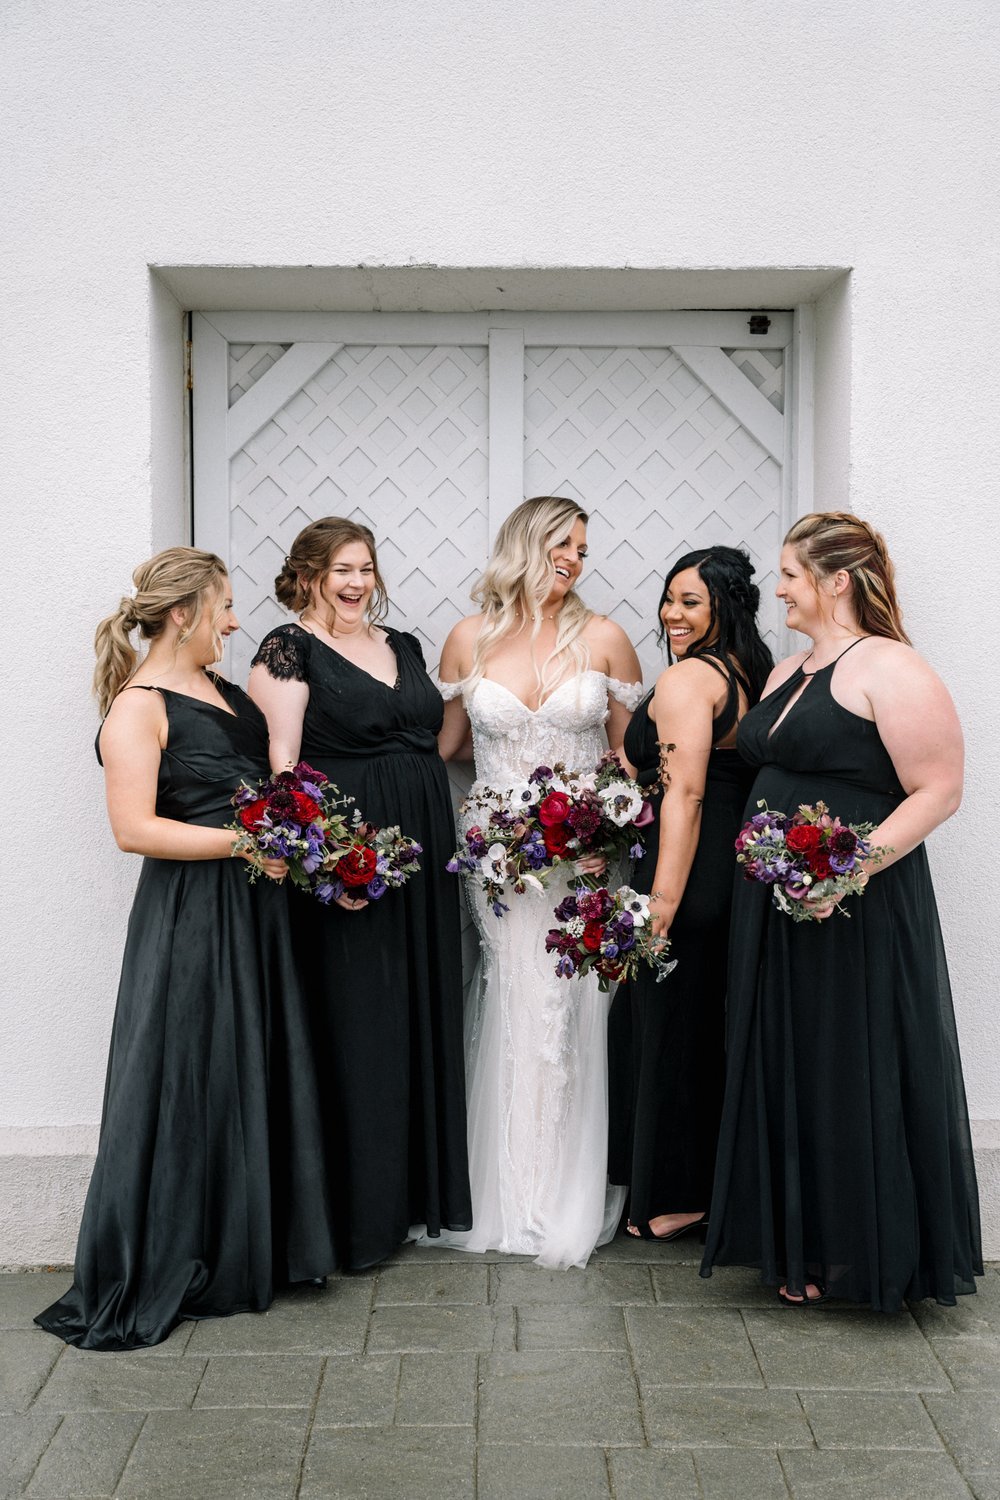 Bridal+Party+with+Drastic+Wildflower+Bouquets.jpg